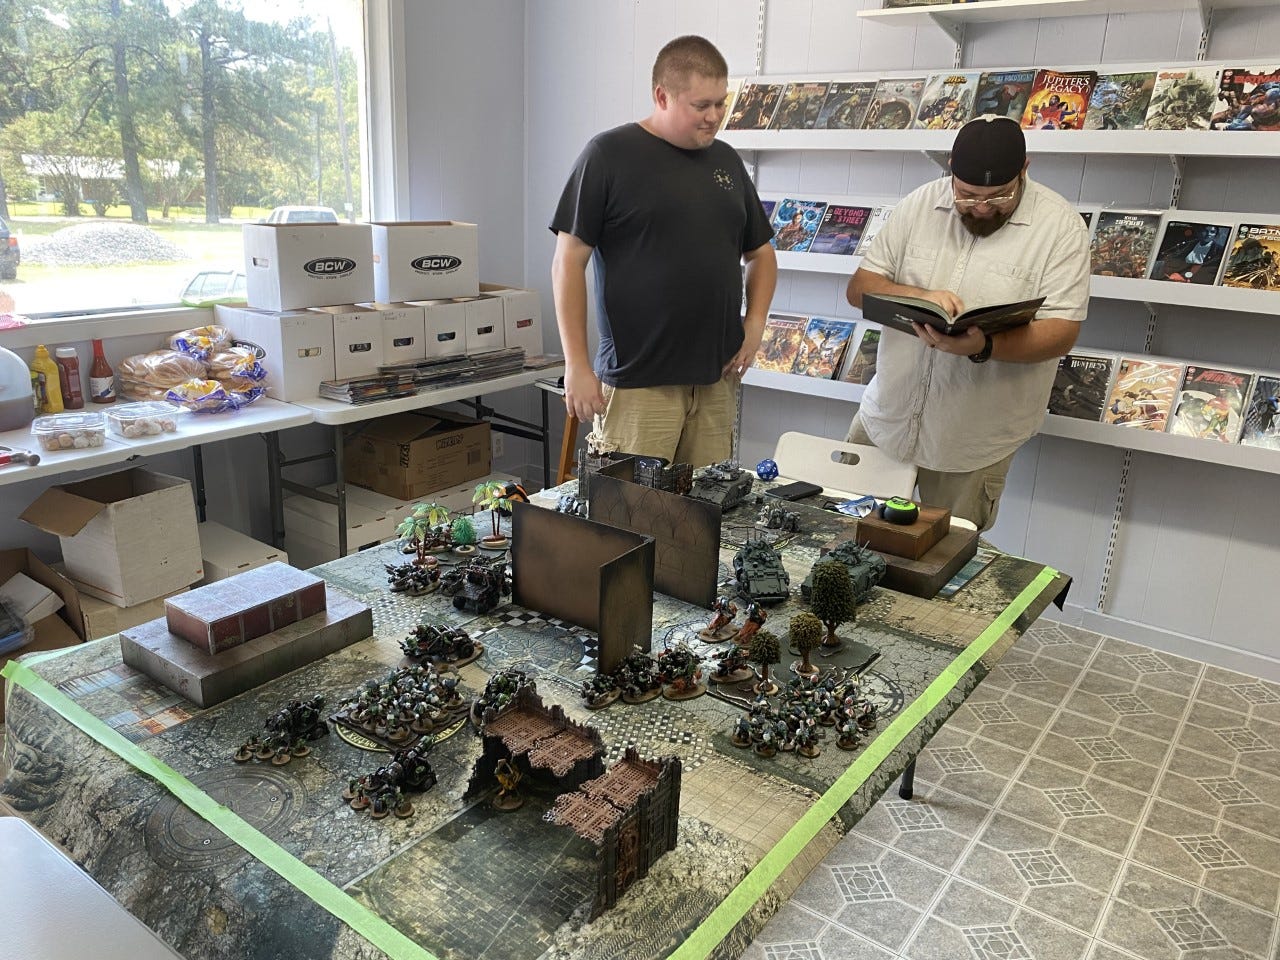 The battlefield was set at The Box as players participated in a Warhammer tournament.